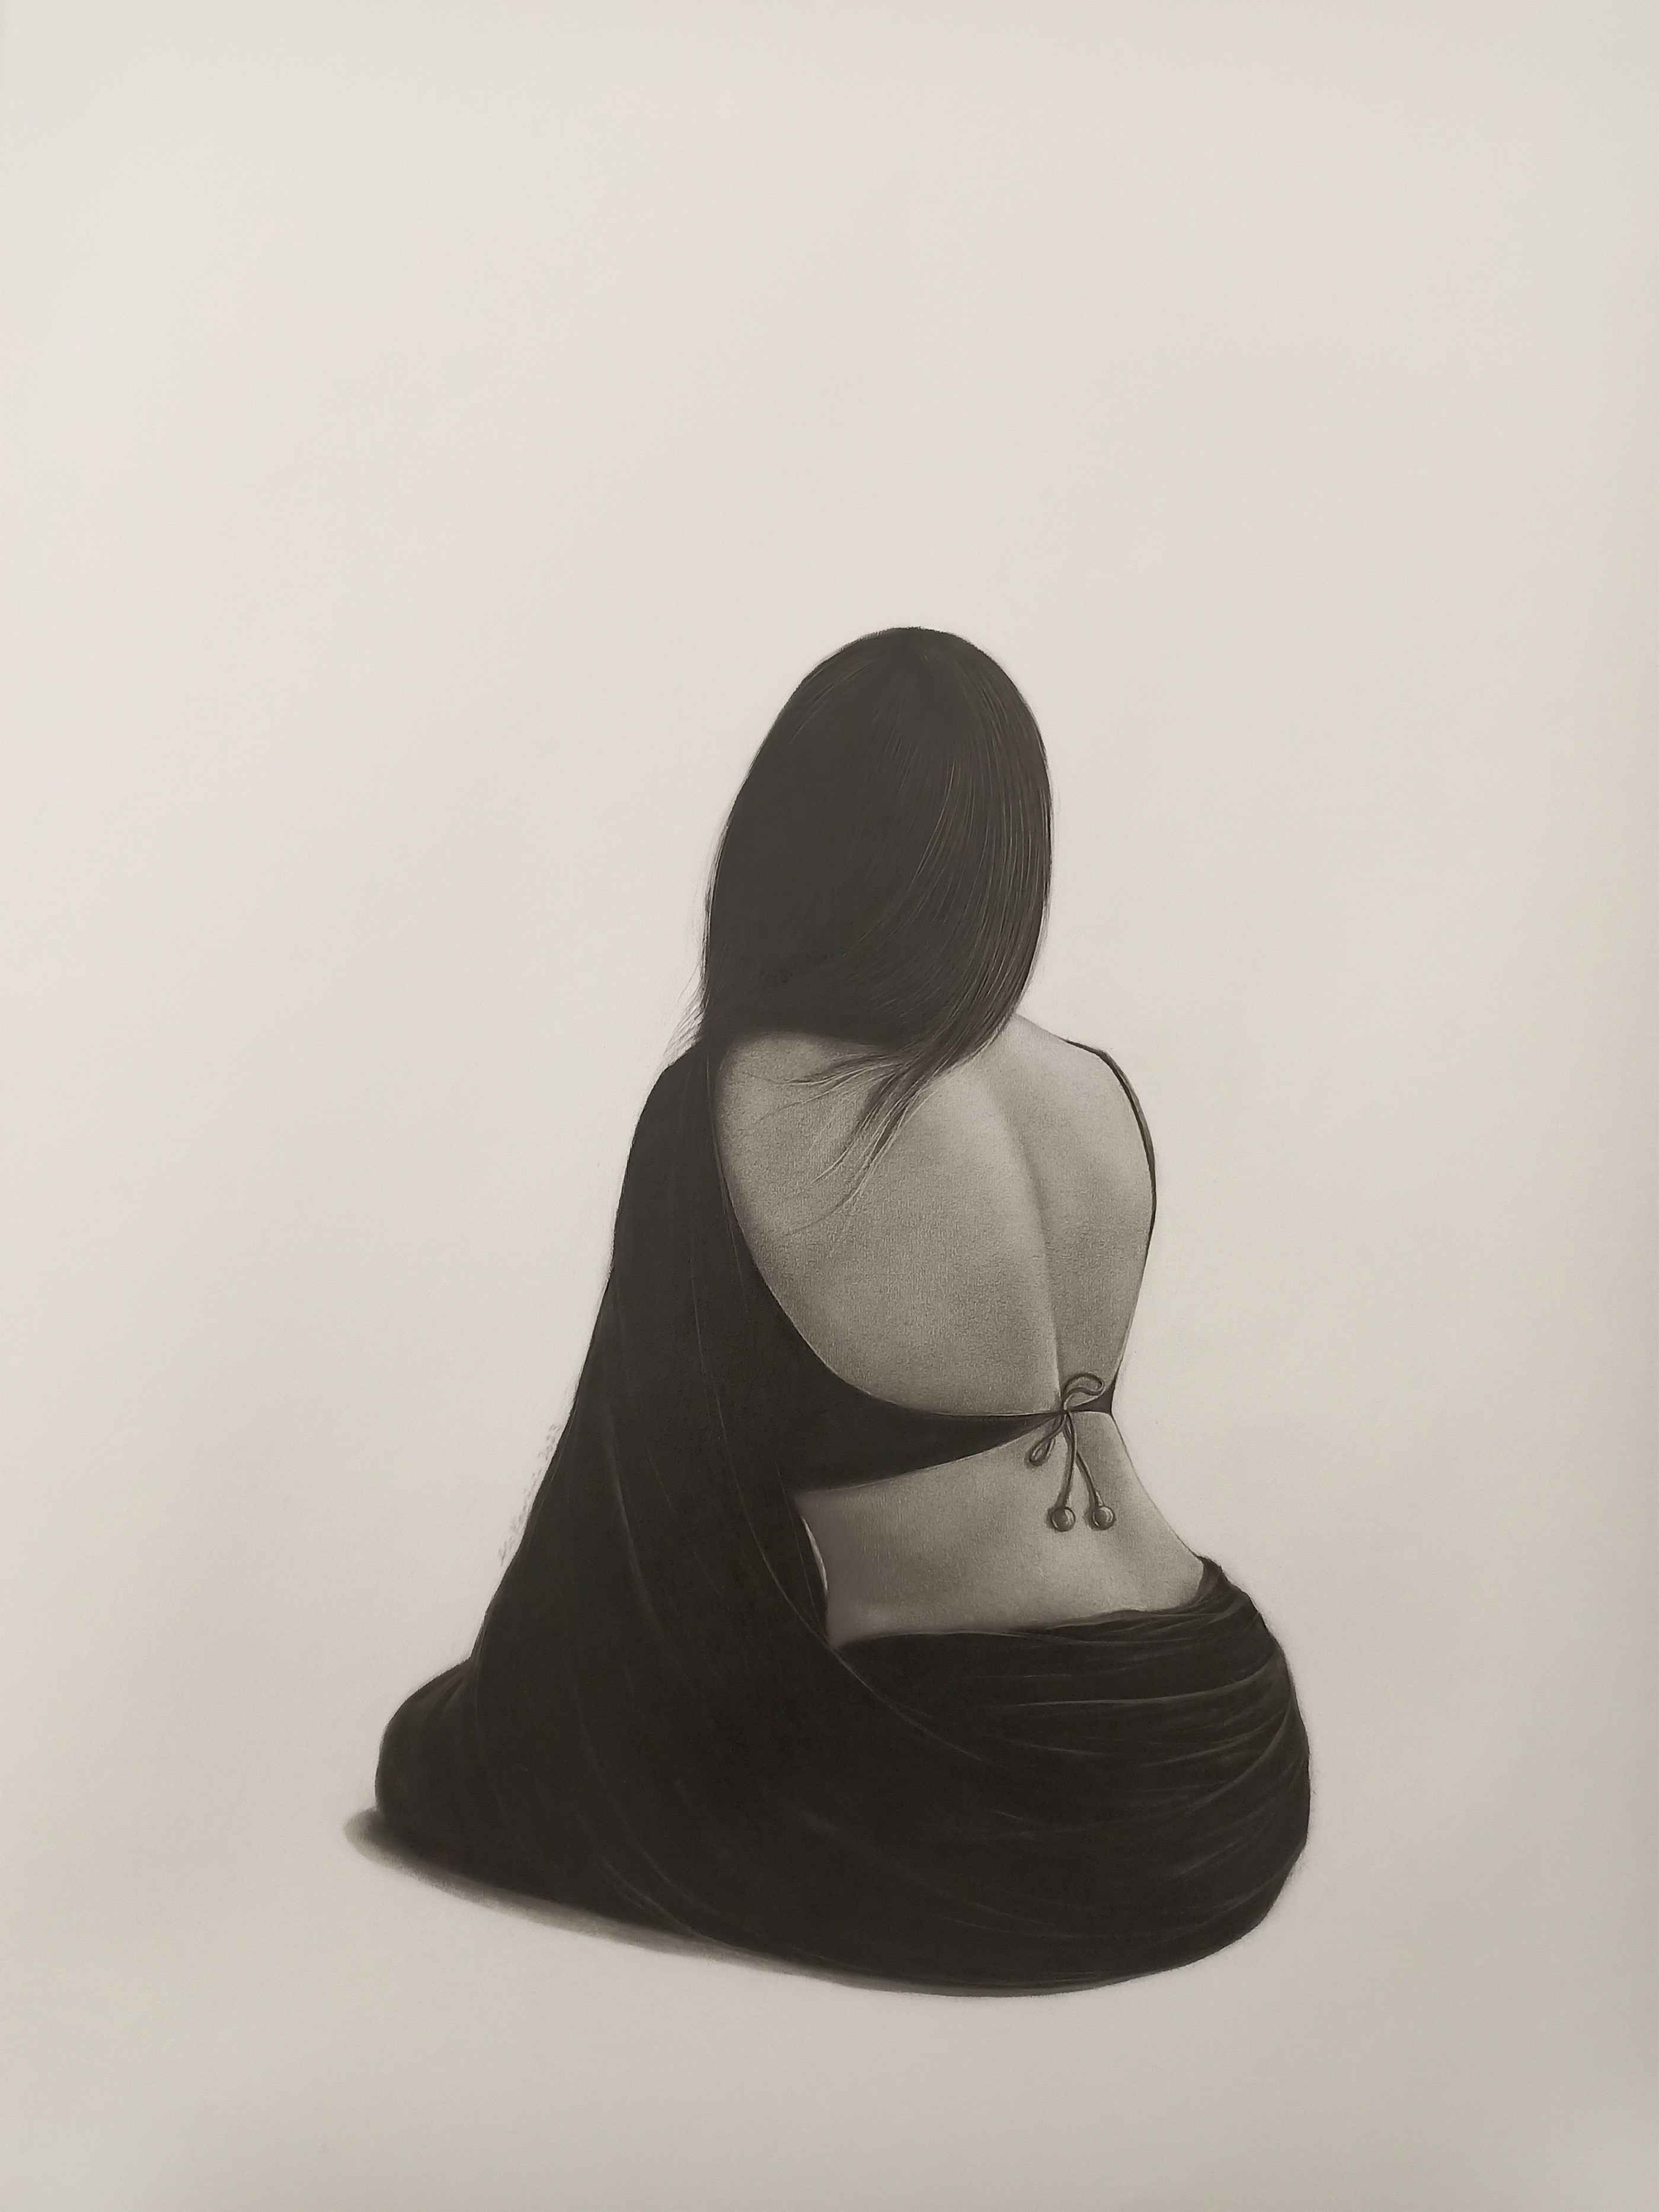 Artist: Ali Karimi<br> Title: UNTITLED 03<br> Medium: Graphite andCharcoal on paper<br> Size: 43x30 inches